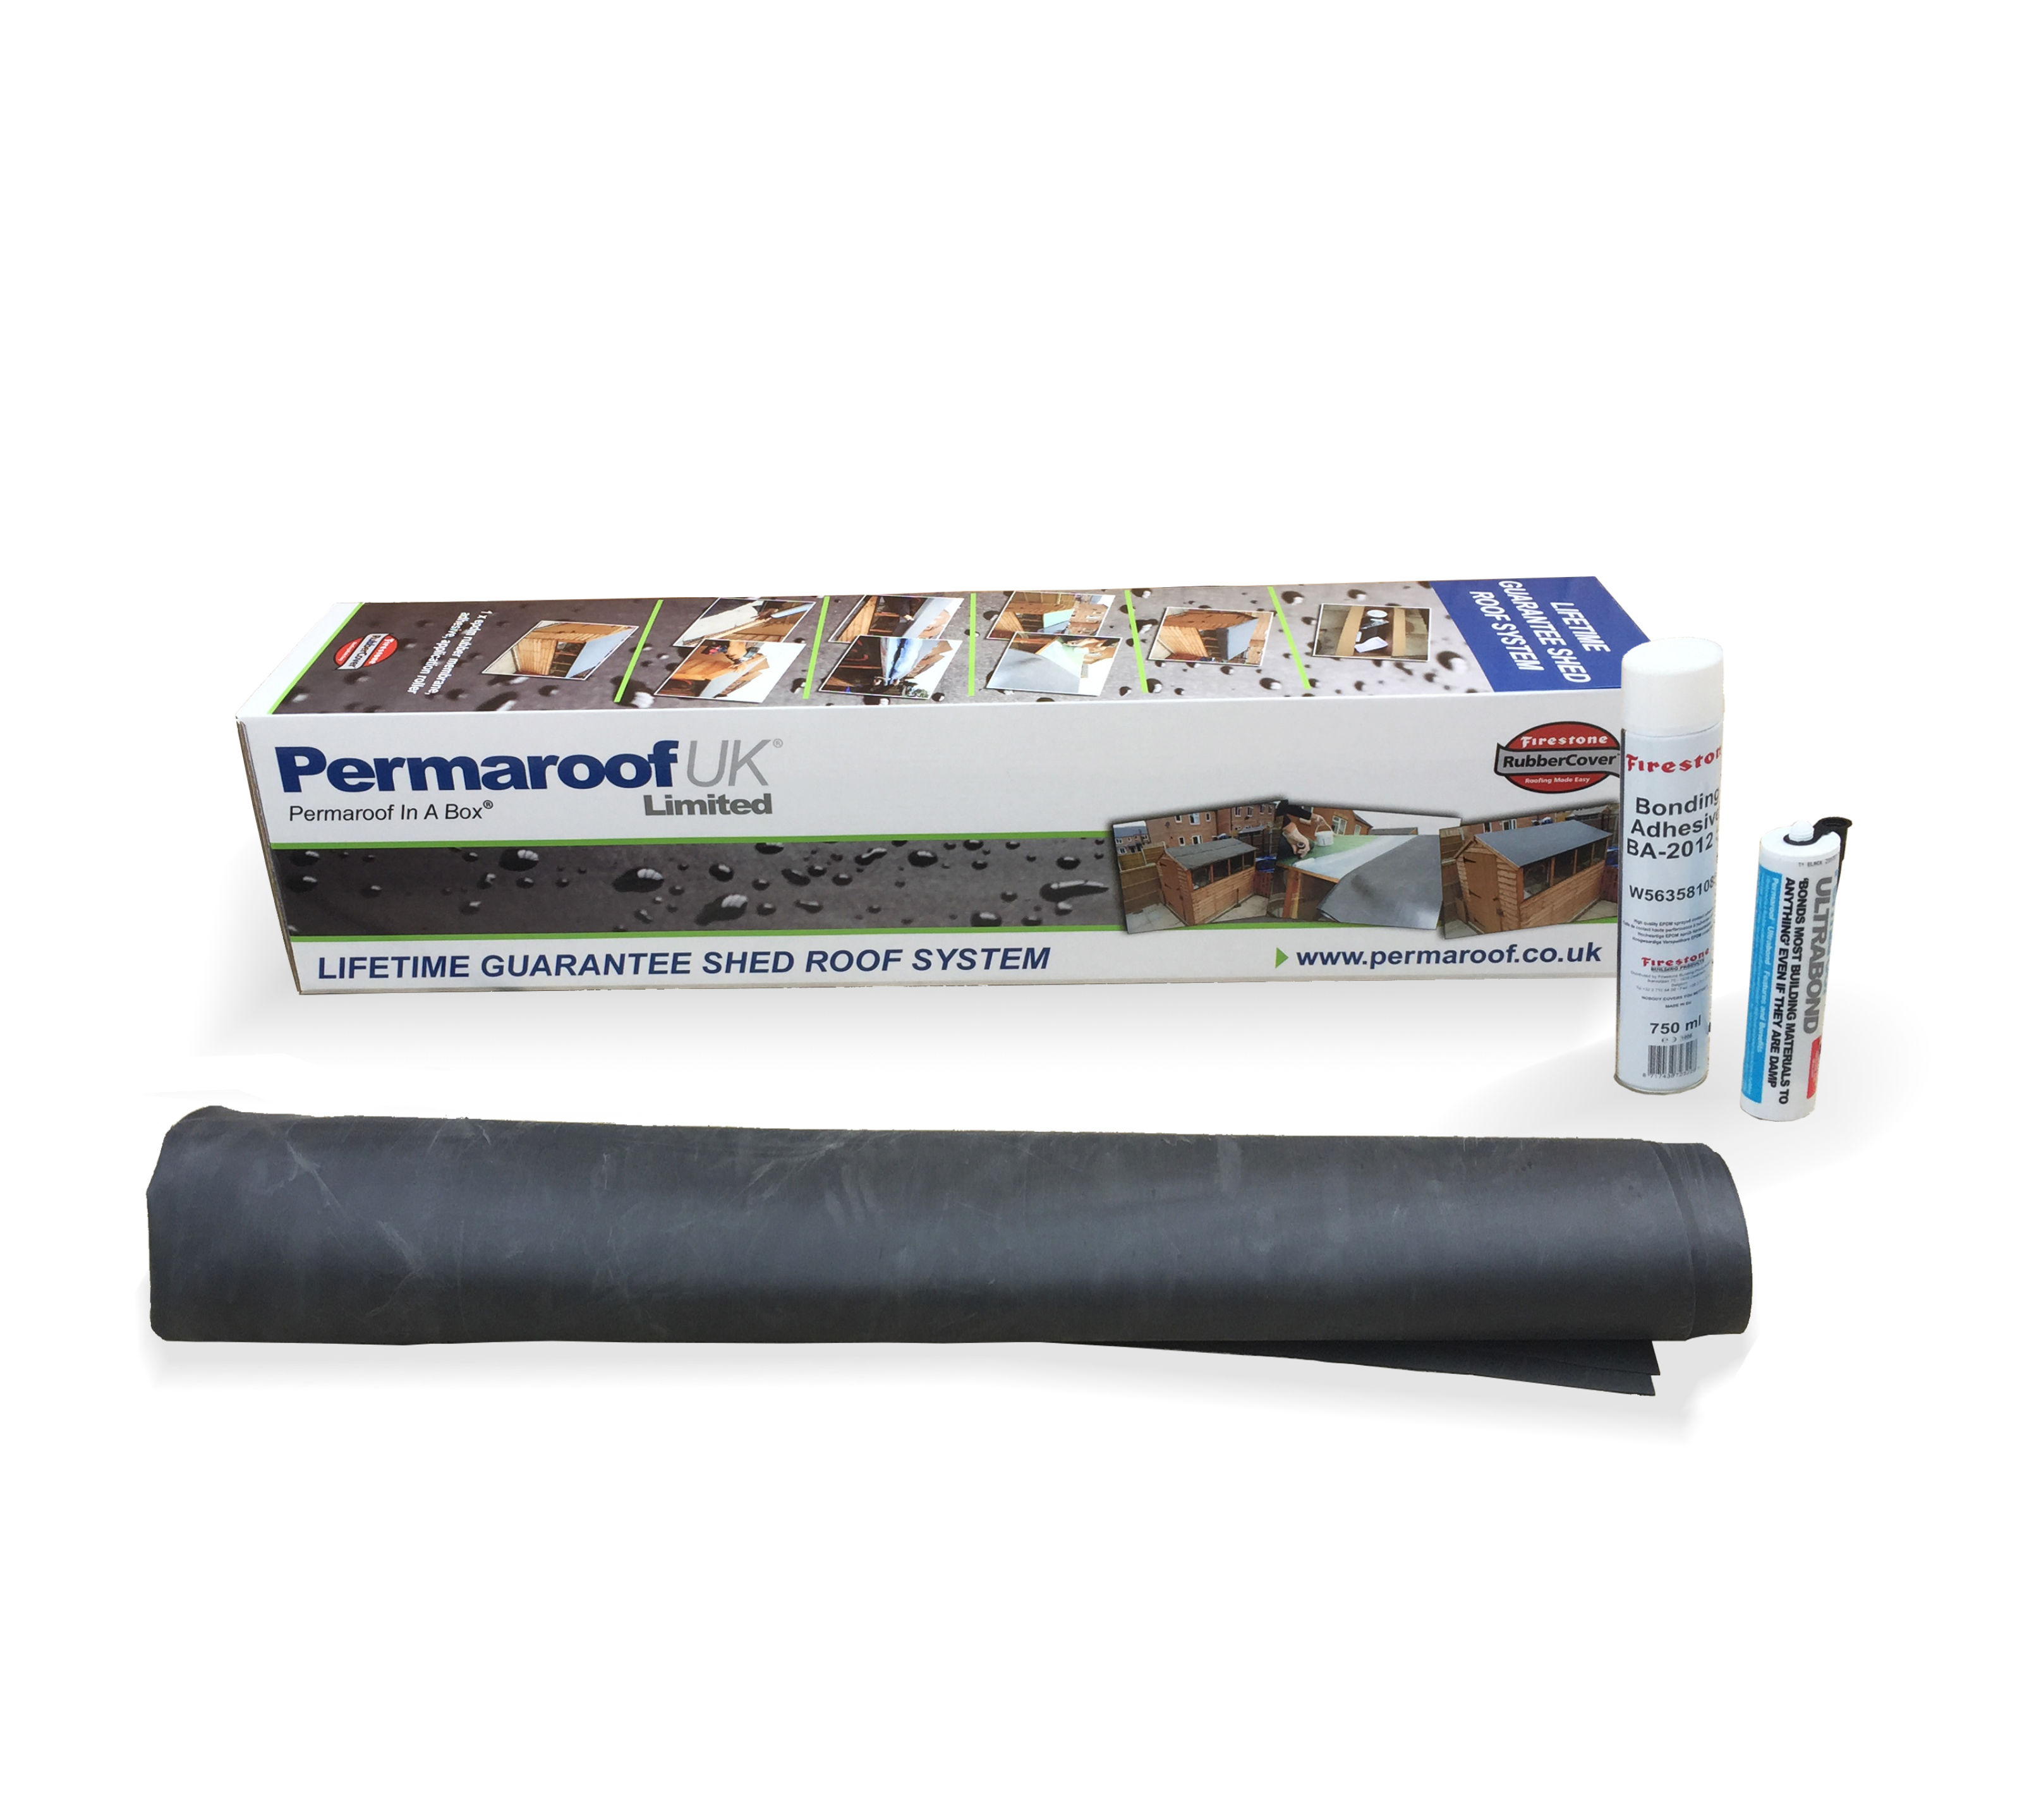 The Firestone EPDM Shed Roof Kit